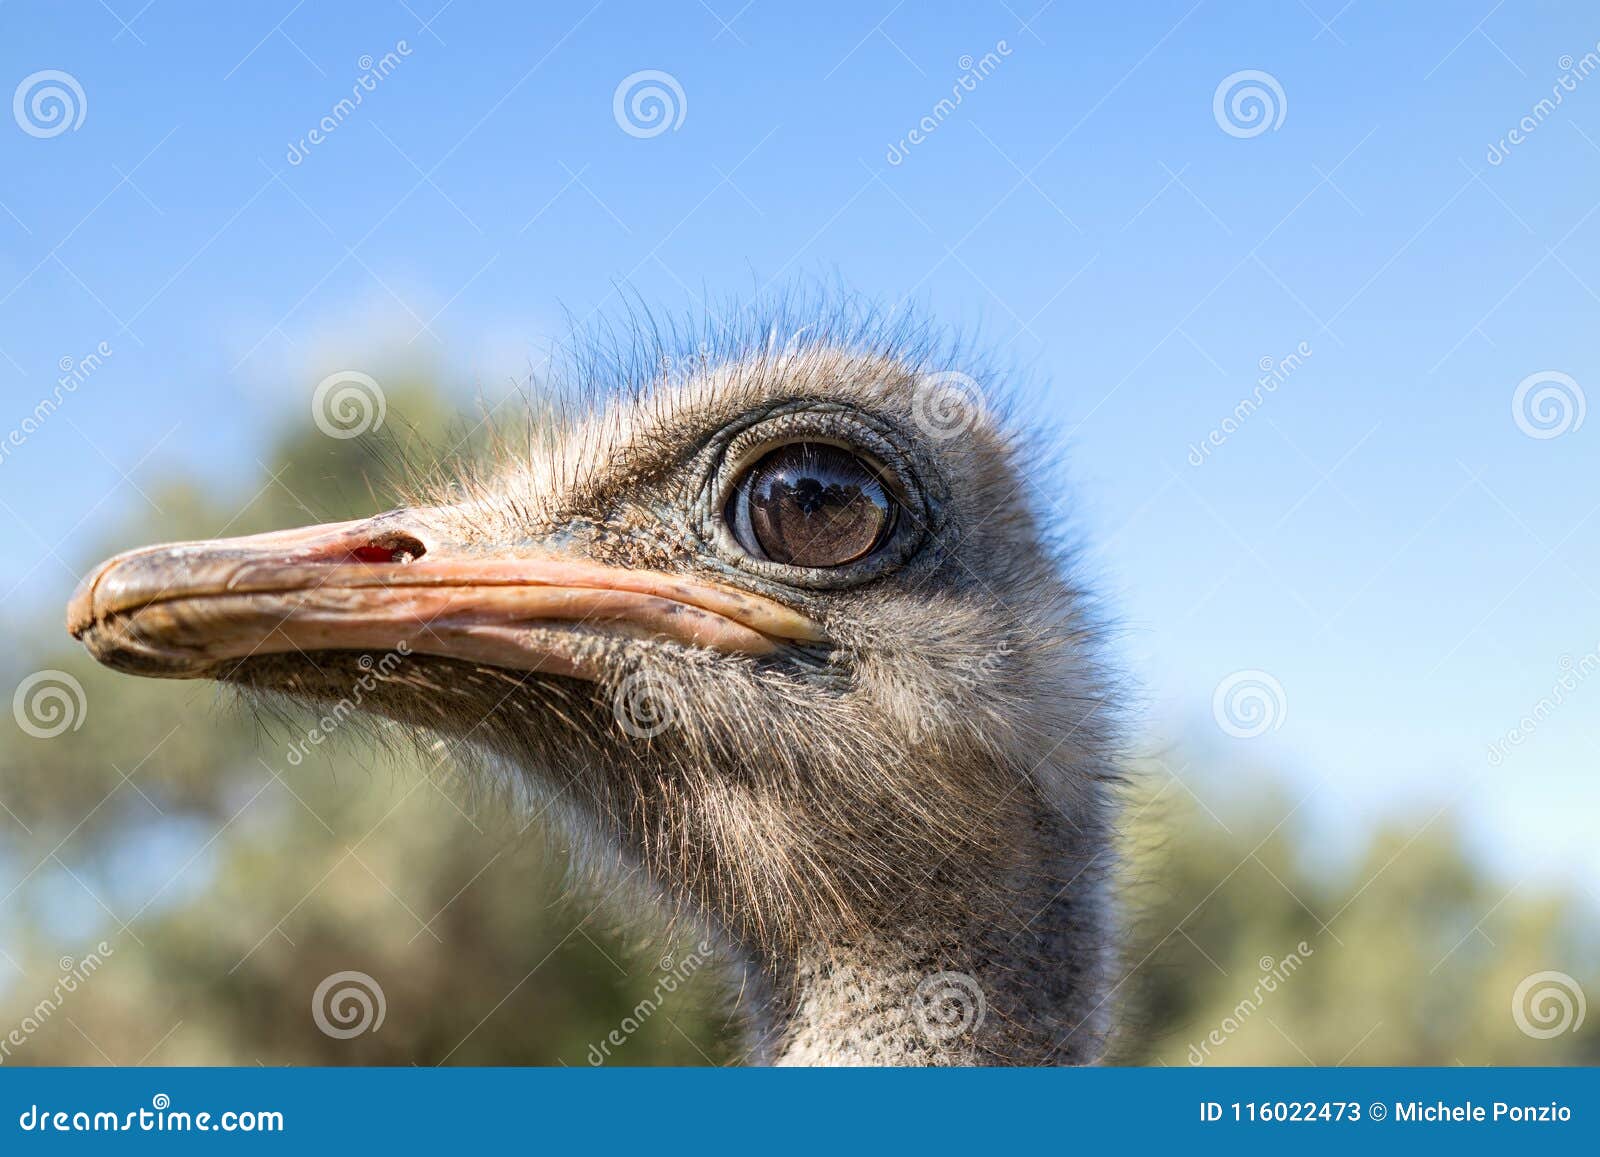 the proud ostrich